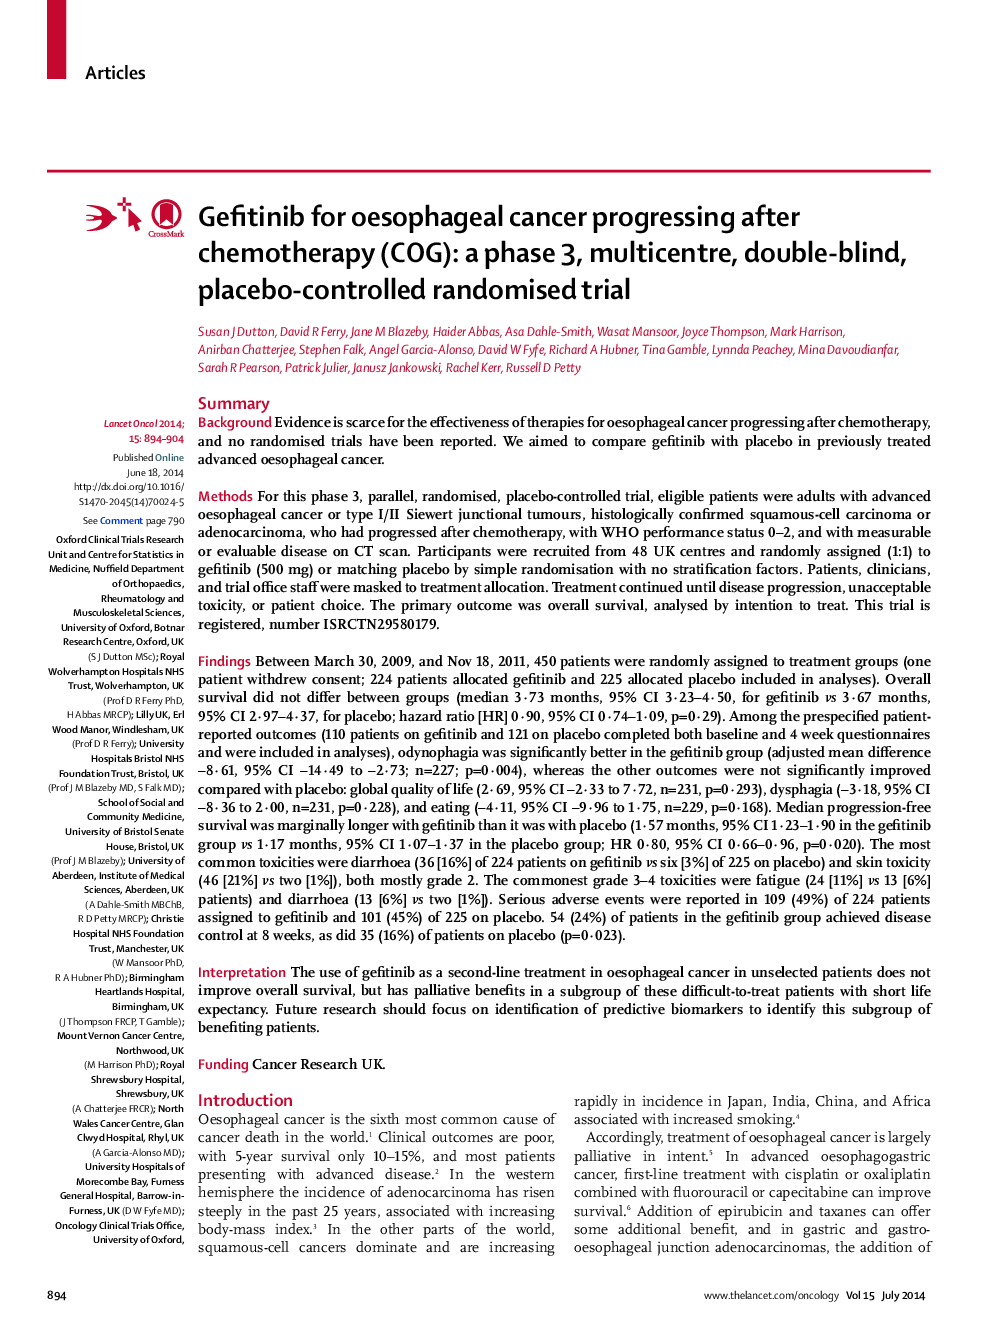 Gefitinib for oesophageal cancer progressing after chemotherapy (COG): a phase 3, multicentre, double-blind, placebo-controlled randomised trial